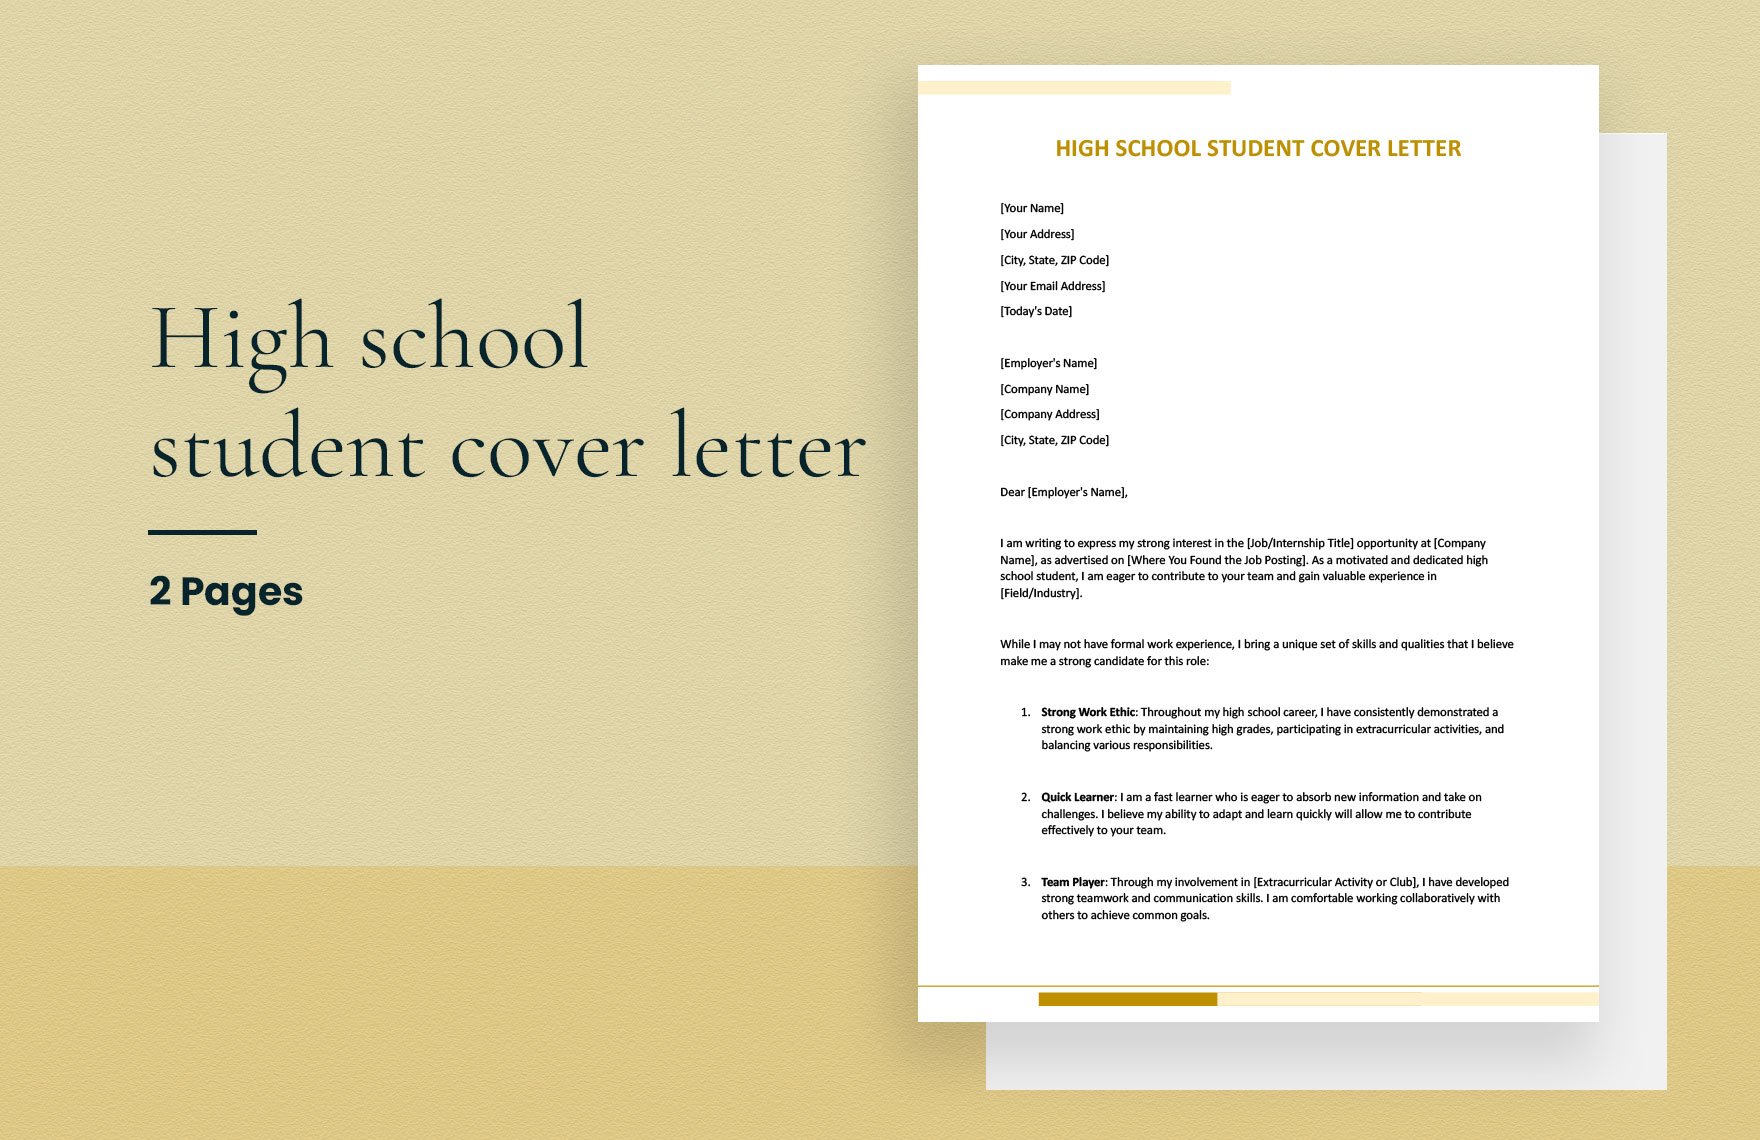 High school student cover letter in Word, Google Docs - Download ...